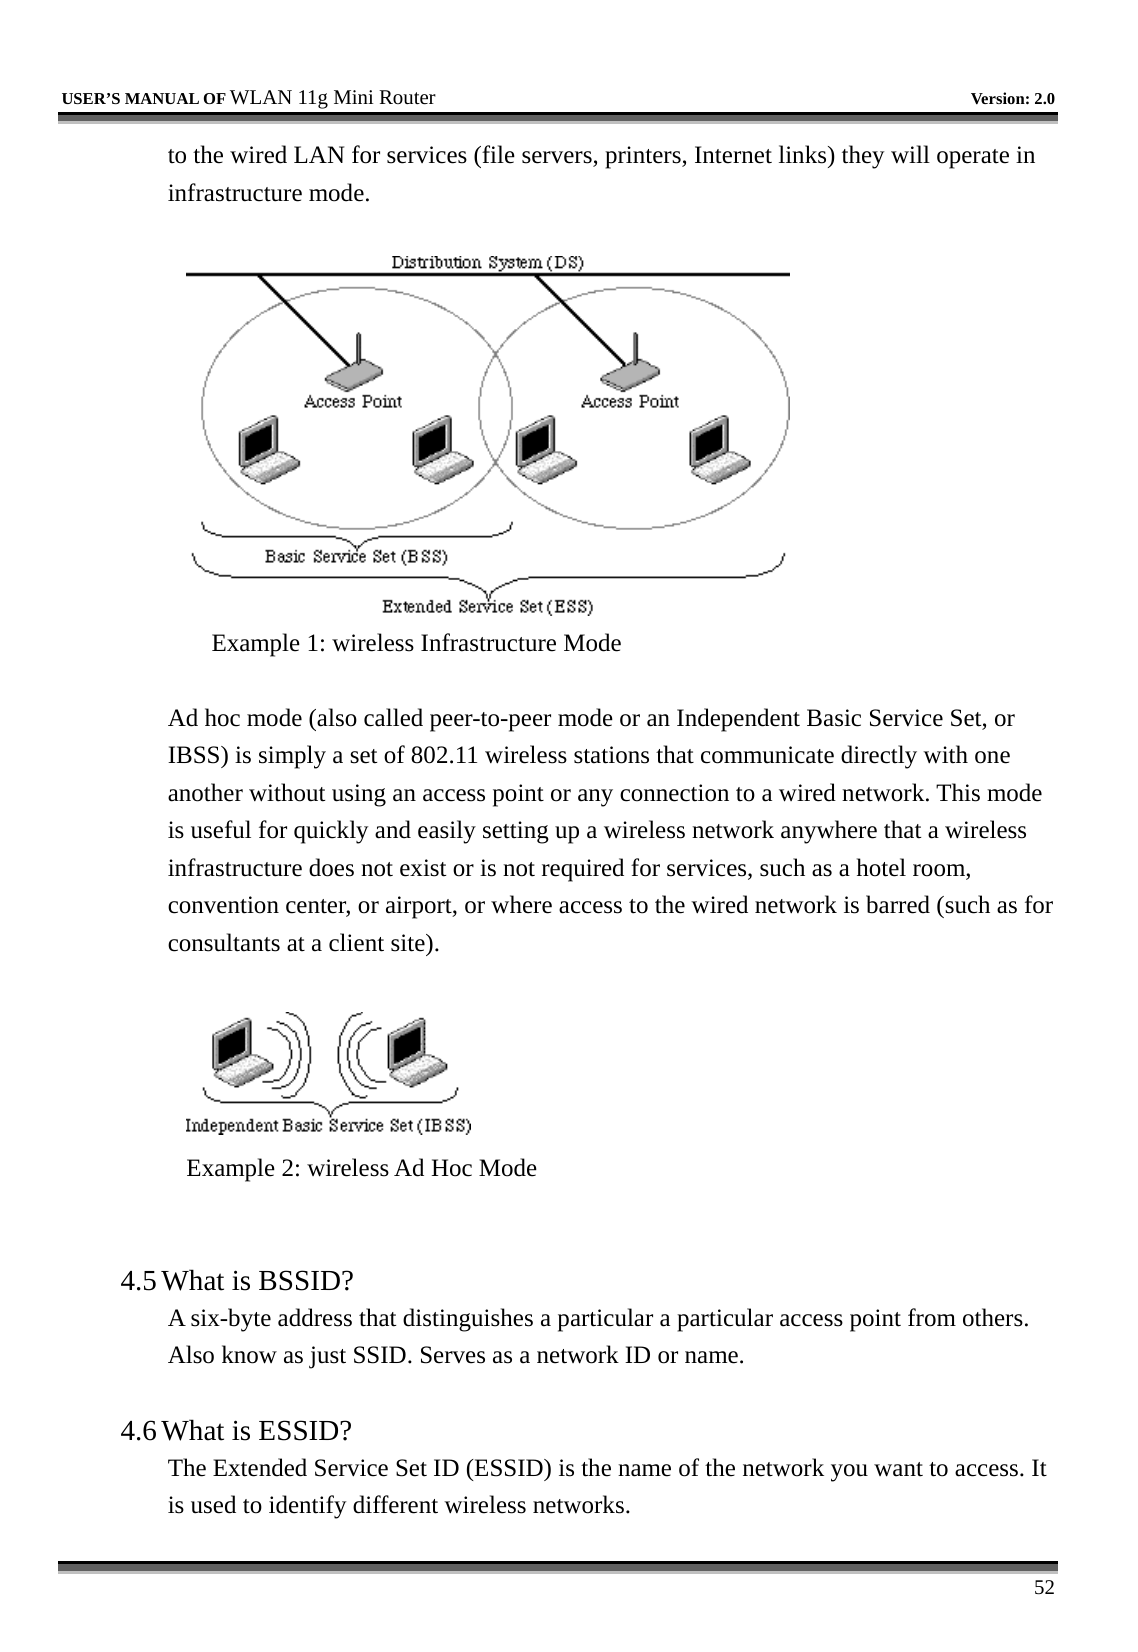   USER’S MANUAL OF WLAN 11g Mini Router   Version: 2.0     52 to the wired LAN for services (file servers, printers, Internet links) they will operate in infrastructure mode.     Example 1: wireless Infrastructure Mode  Ad hoc mode (also called peer-to-peer mode or an Independent Basic Service Set, or IBSS) is simply a set of 802.11 wireless stations that communicate directly with one another without using an access point or any connection to a wired network. This mode is useful for quickly and easily setting up a wireless network anywhere that a wireless infrastructure does not exist or is not required for services, such as a hotel room, convention center, or airport, or where access to the wired network is barred (such as for consultants at a client site).     Example 2: wireless Ad Hoc Mode   4.5 What is BSSID?   A six-byte address that distinguishes a particular a particular access point from others. Also know as just SSID. Serves as a network ID or name.    4.6 What is ESSID?   The Extended Service Set ID (ESSID) is the name of the network you want to access. It is used to identify different wireless networks.   